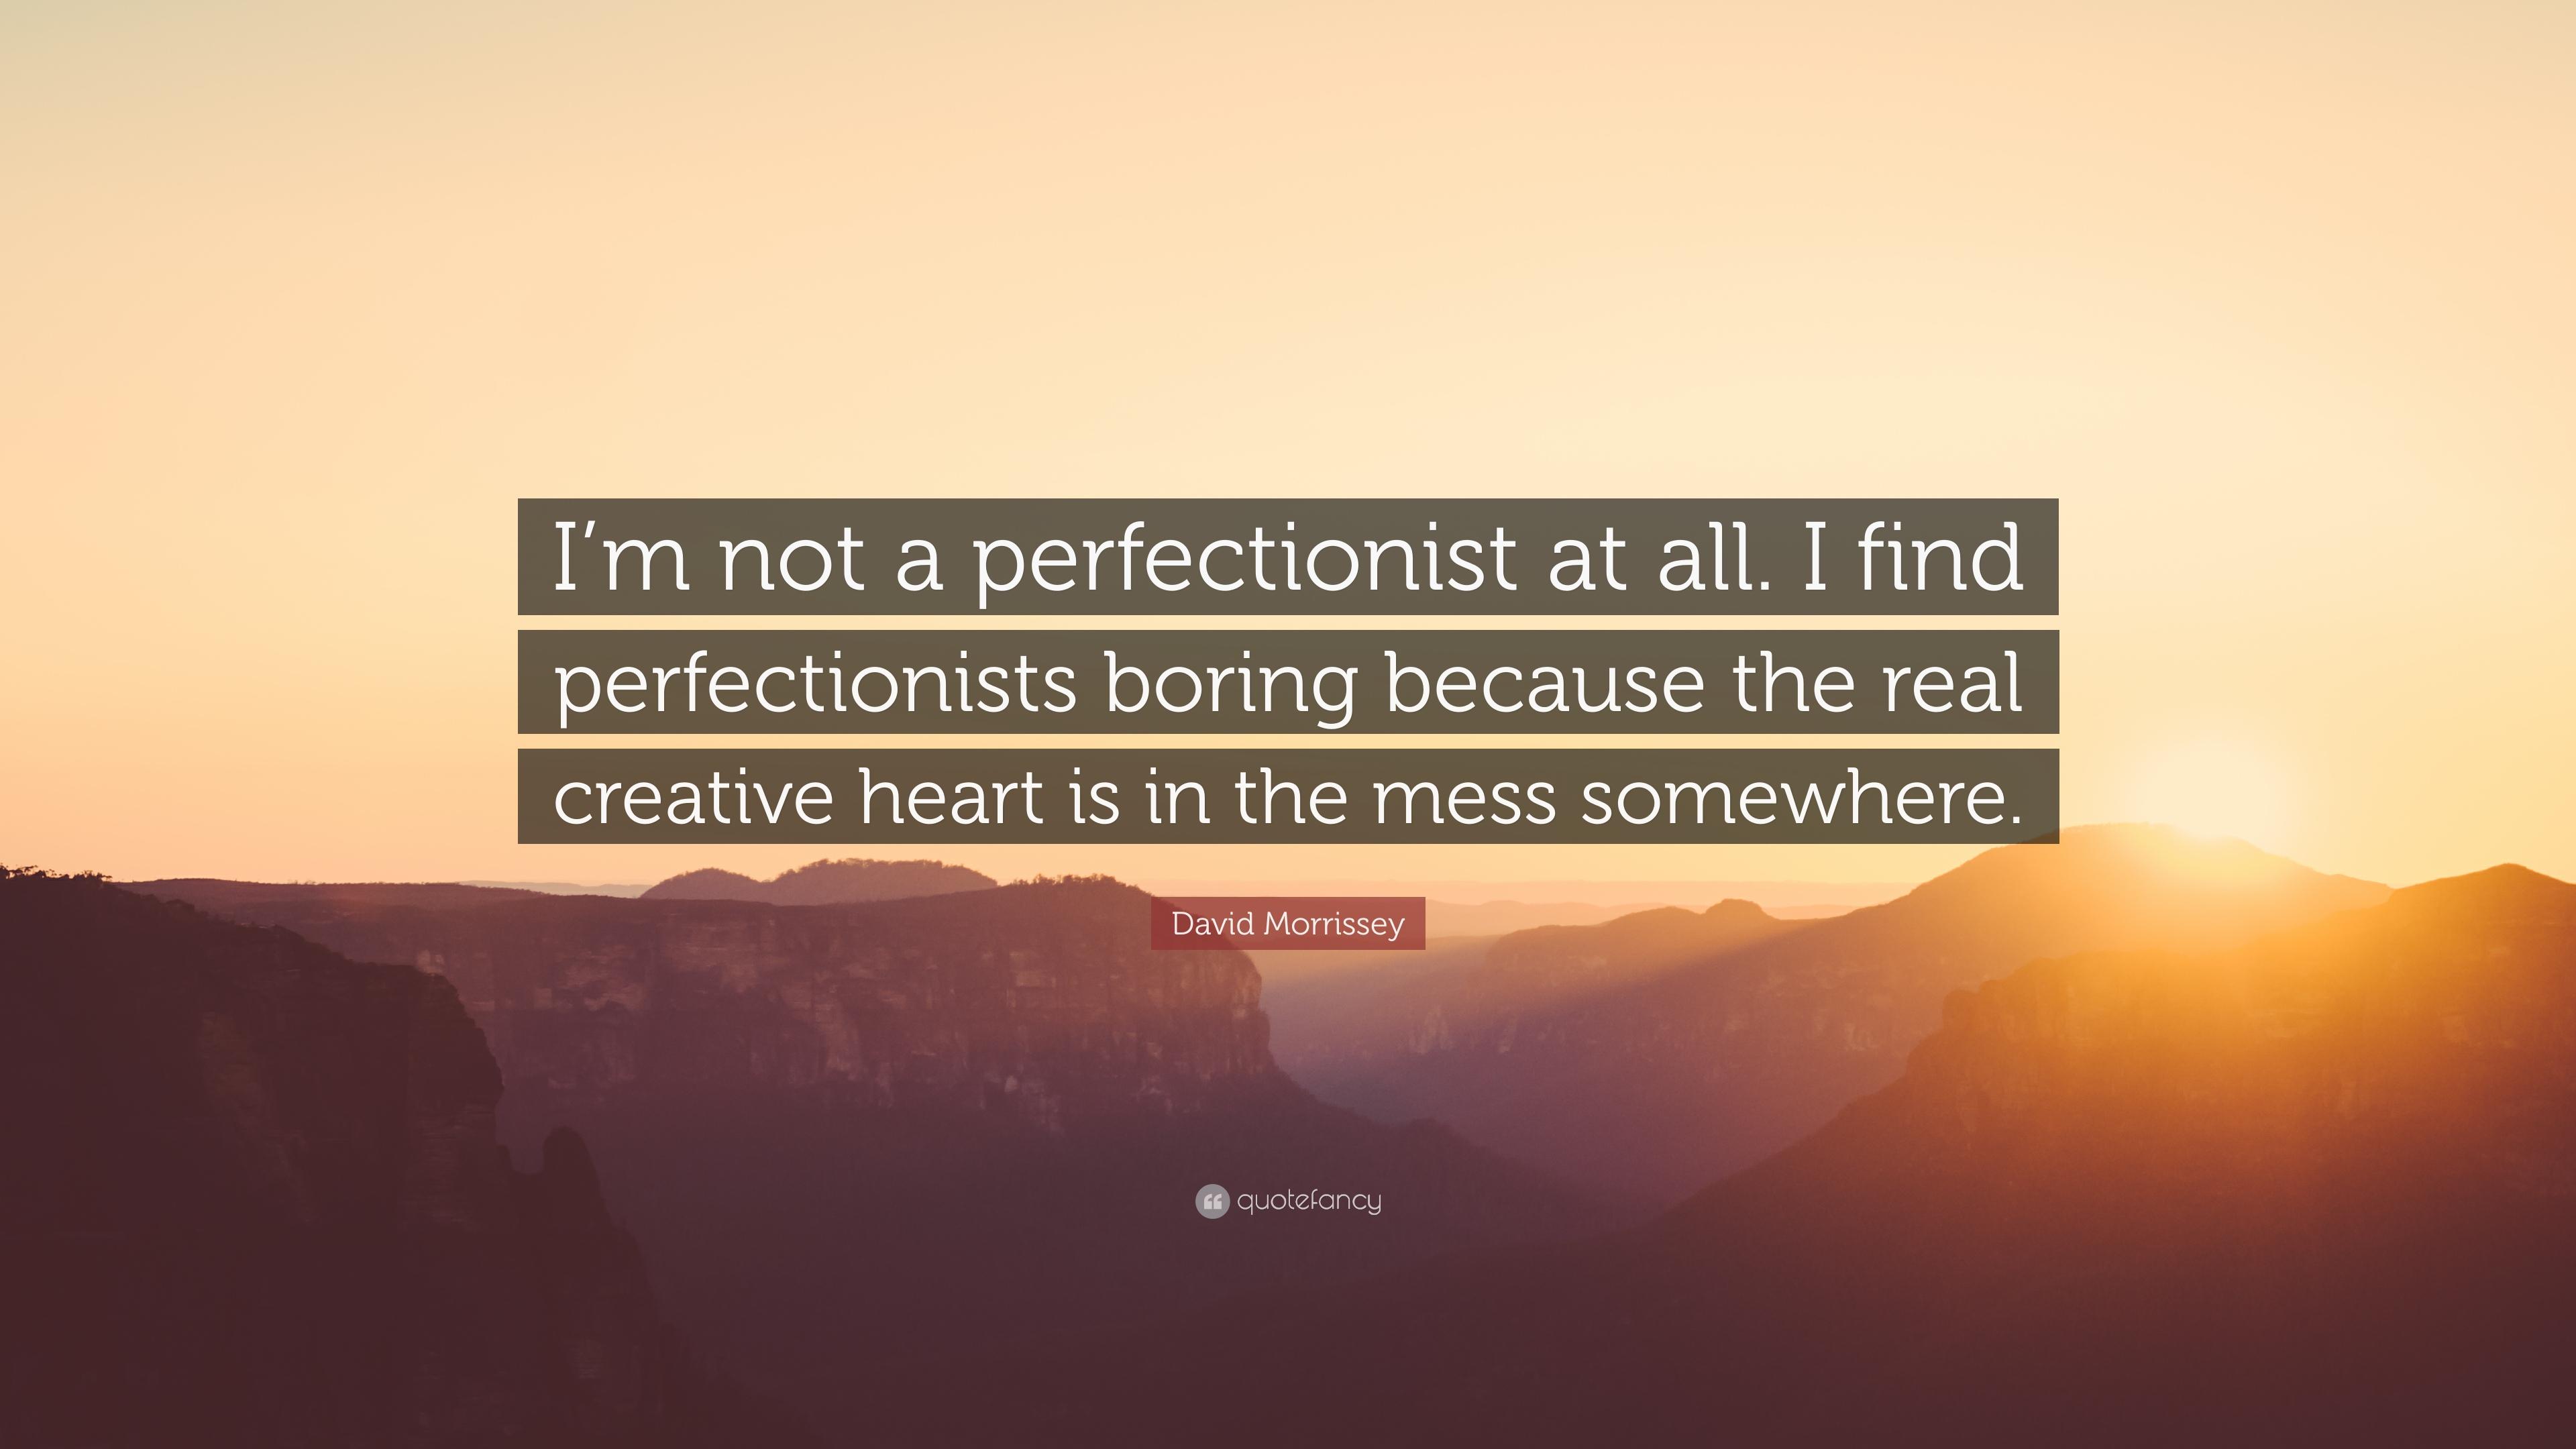 David Morrissey Quote: “I'm not a perfectionist at all. I